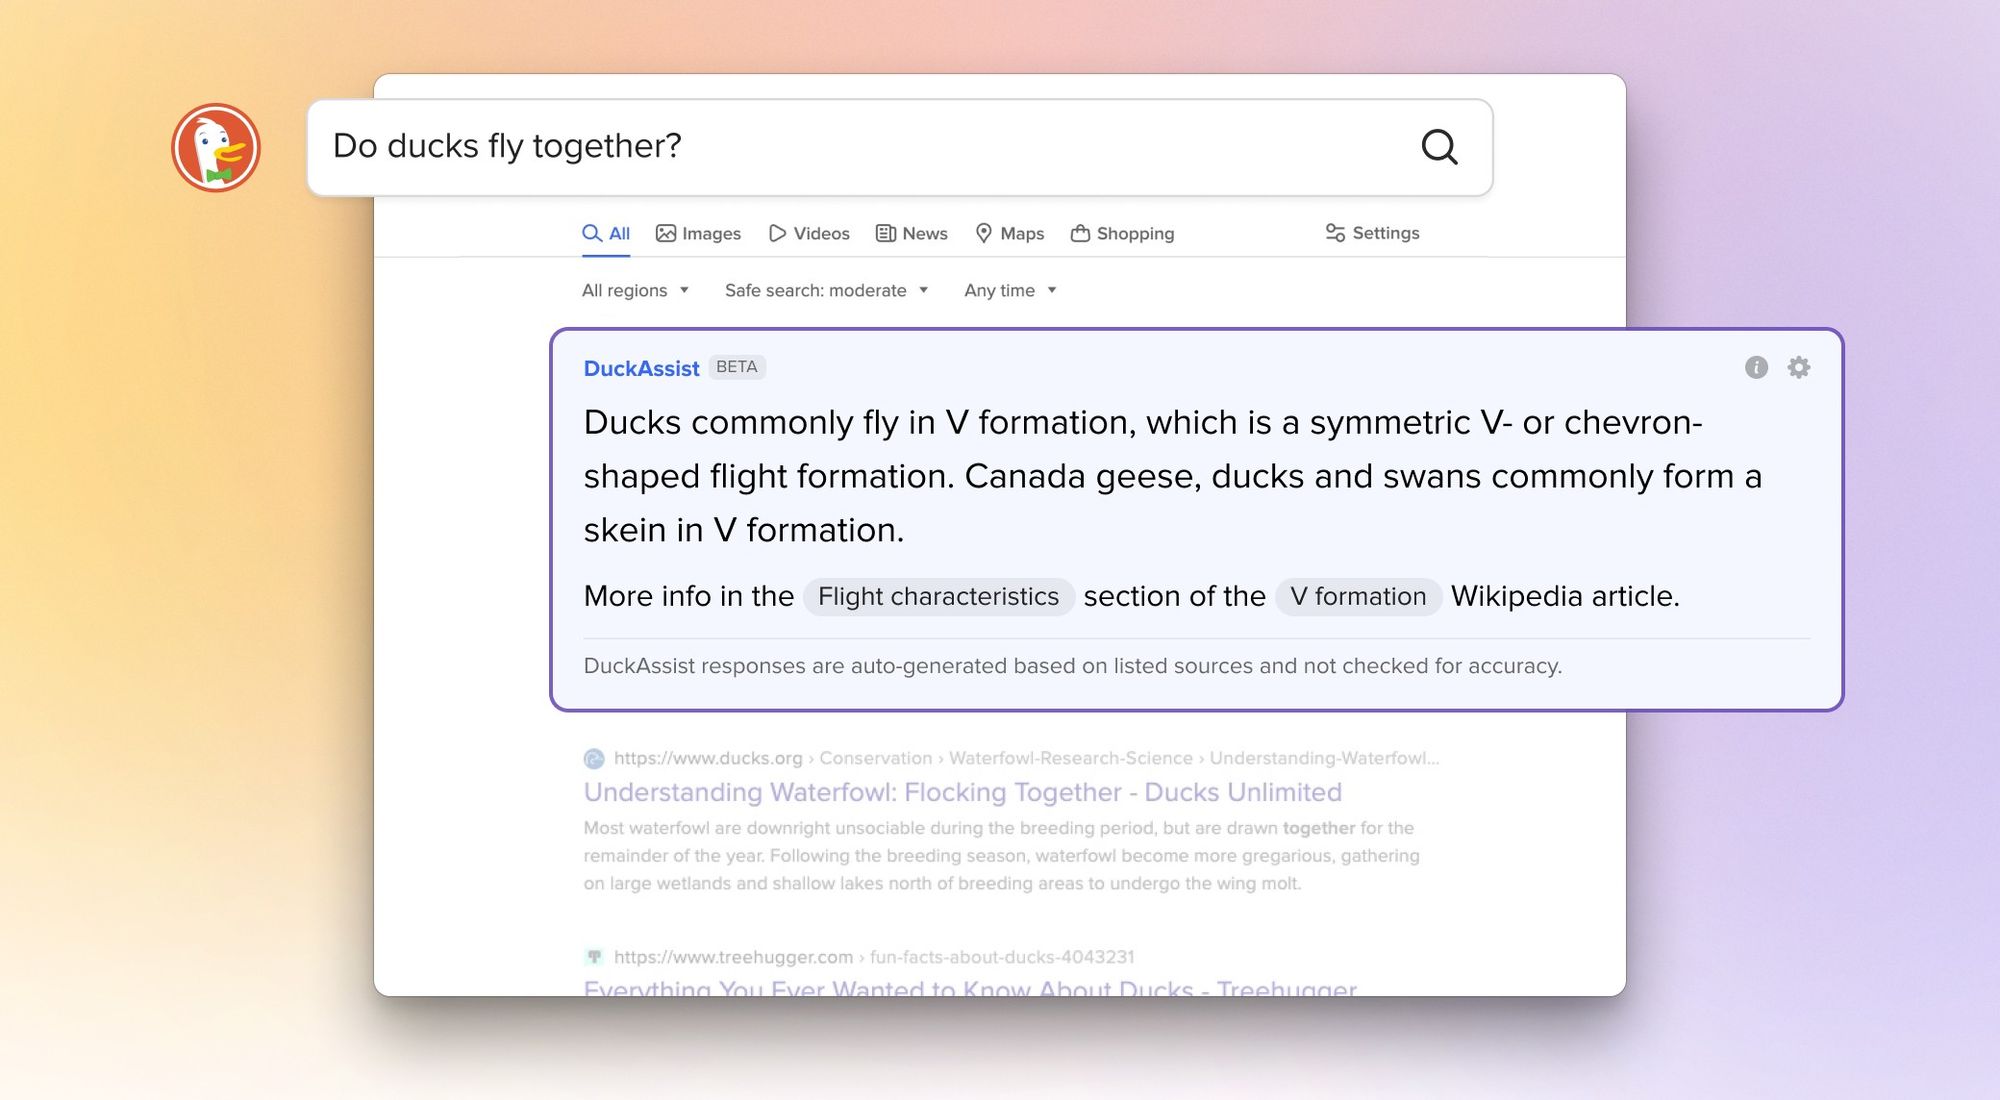 DuckDuckGo launches DuckAssist: a new feature that generates natural language answers to search queries using Wikipedia